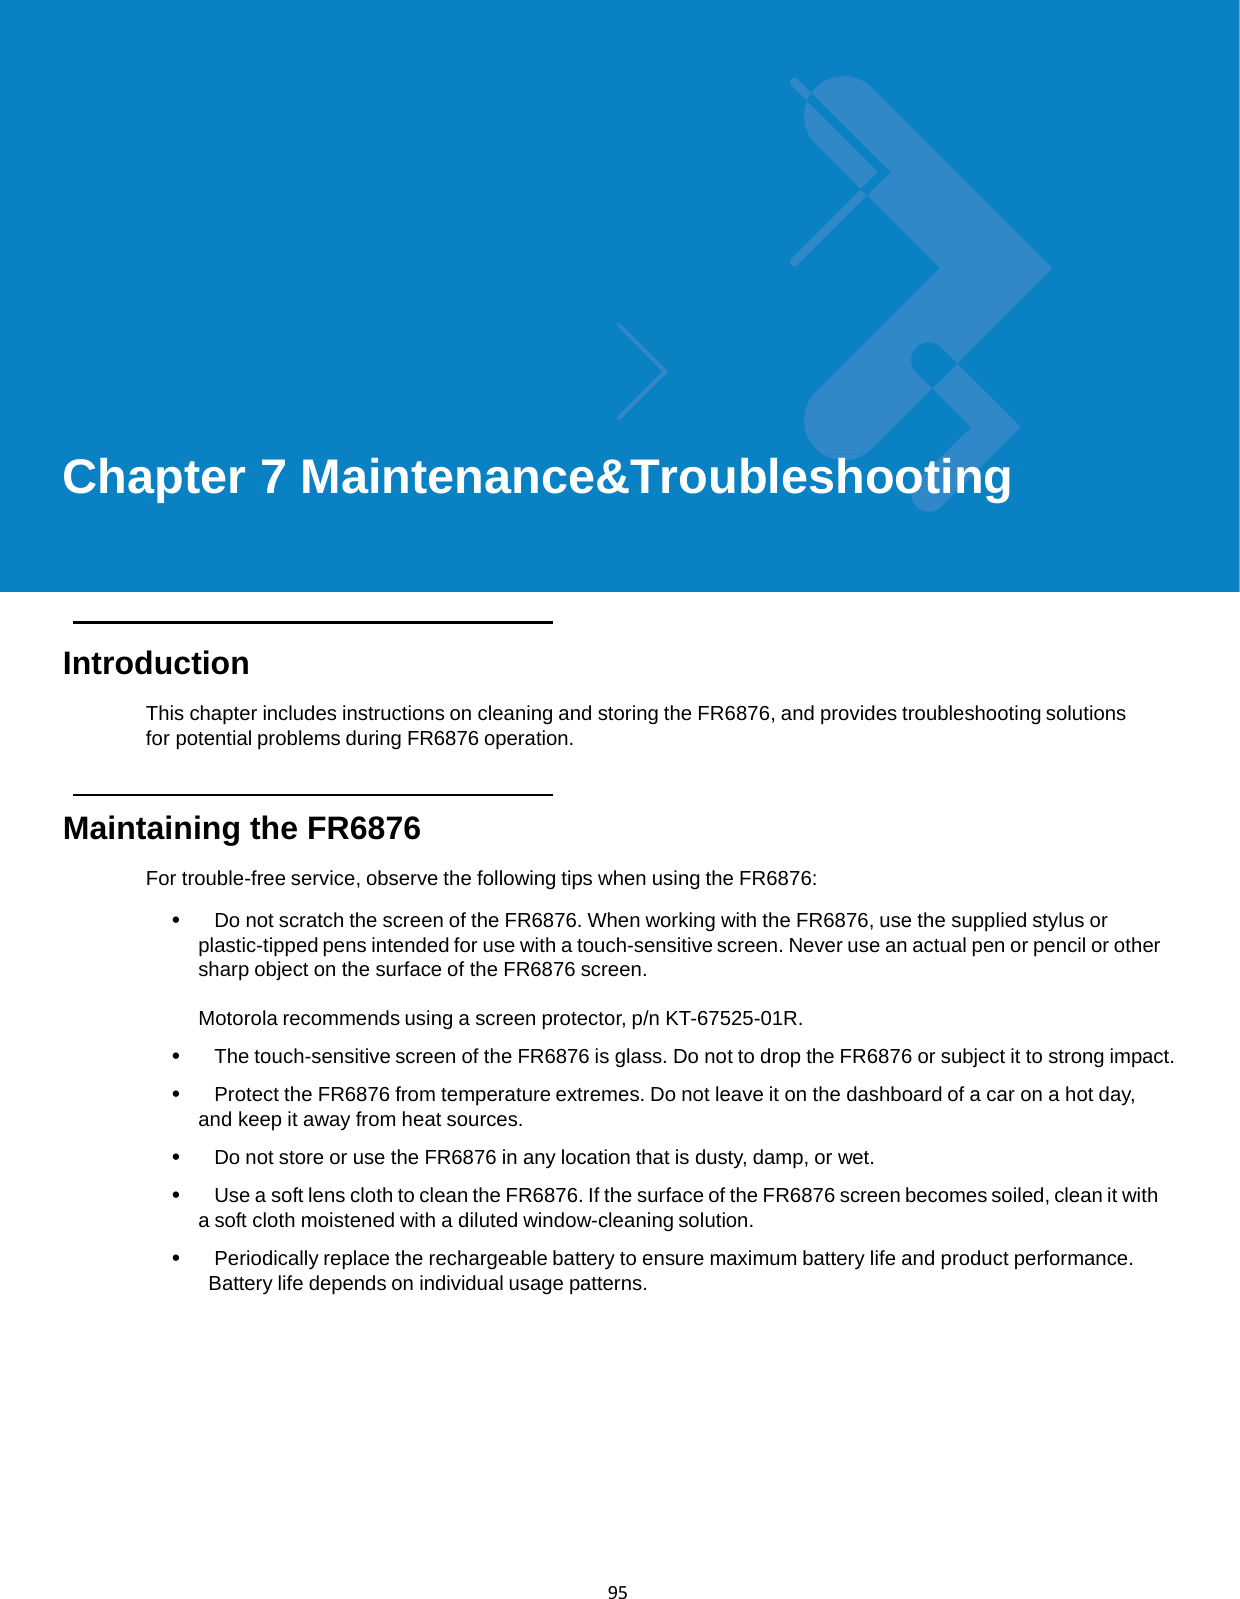  95              Chapter 7 Maintenance&amp;Troubleshooting       Introduction  This chapter includes instructions on cleaning and storing the FR6876, and provides troubleshooting solutions for potential problems during FR6876 operation.    Maintaining the FR6876  For trouble-free service, observe the following tips when using the FR6876:  •   Do not scratch the screen of the FR6876. When working with the FR6876, use the supplied stylus or plastic-tipped pens intended for use with a touch-sensitive screen. Never use an actual pen or pencil or other sharp object on the surface of the FR6876 screen.  Motorola recommends using a screen protector, p/n KT-67525-01R.  •   The touch-sensitive screen of the FR6876 is glass. Do not to drop the FR6876 or subject it to strong impact.  •   Protect the FR6876 from temperature extremes. Do not leave it on the dashboard of a car on a hot day, and keep it away from heat sources.  •   Do not store or use the FR6876 in any location that is dusty, damp, or wet.  •   Use a soft lens cloth to clean the FR6876. If the surface of the FR6876 screen becomes soiled, clean it with a soft cloth moistened with a diluted window-cleaning solution.  •   Periodically replace the rechargeable battery to ensure maximum battery life and product performance. Battery life depends on individual usage patterns. 